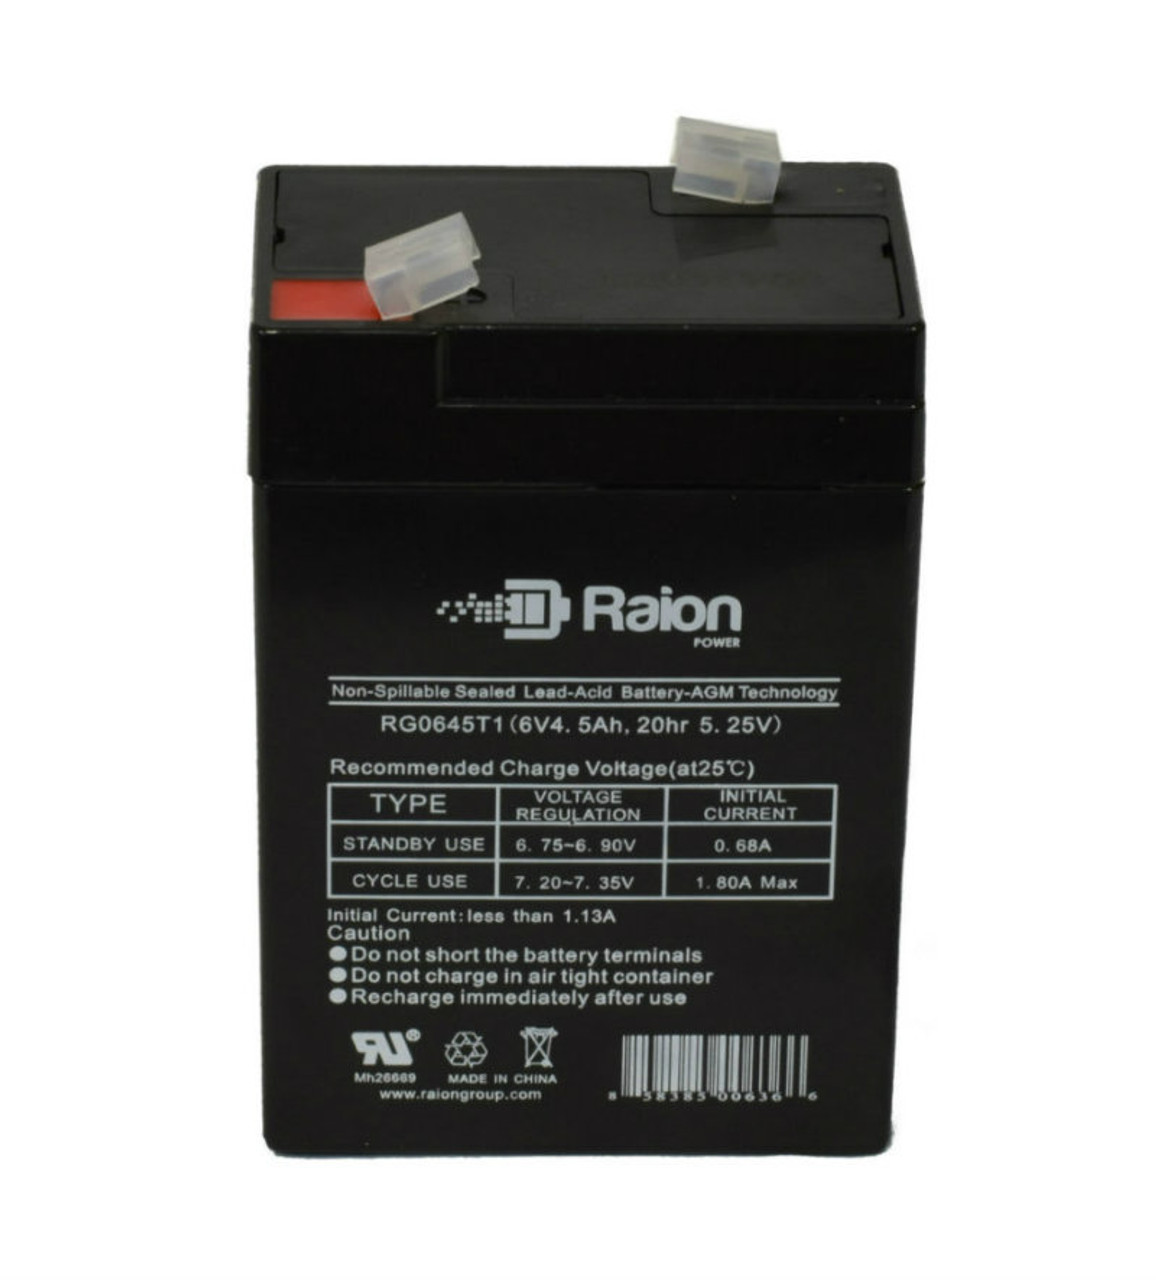 Raion Power RG0645T1 Replacement Battery Cartridge for Sentry Lite Inflater